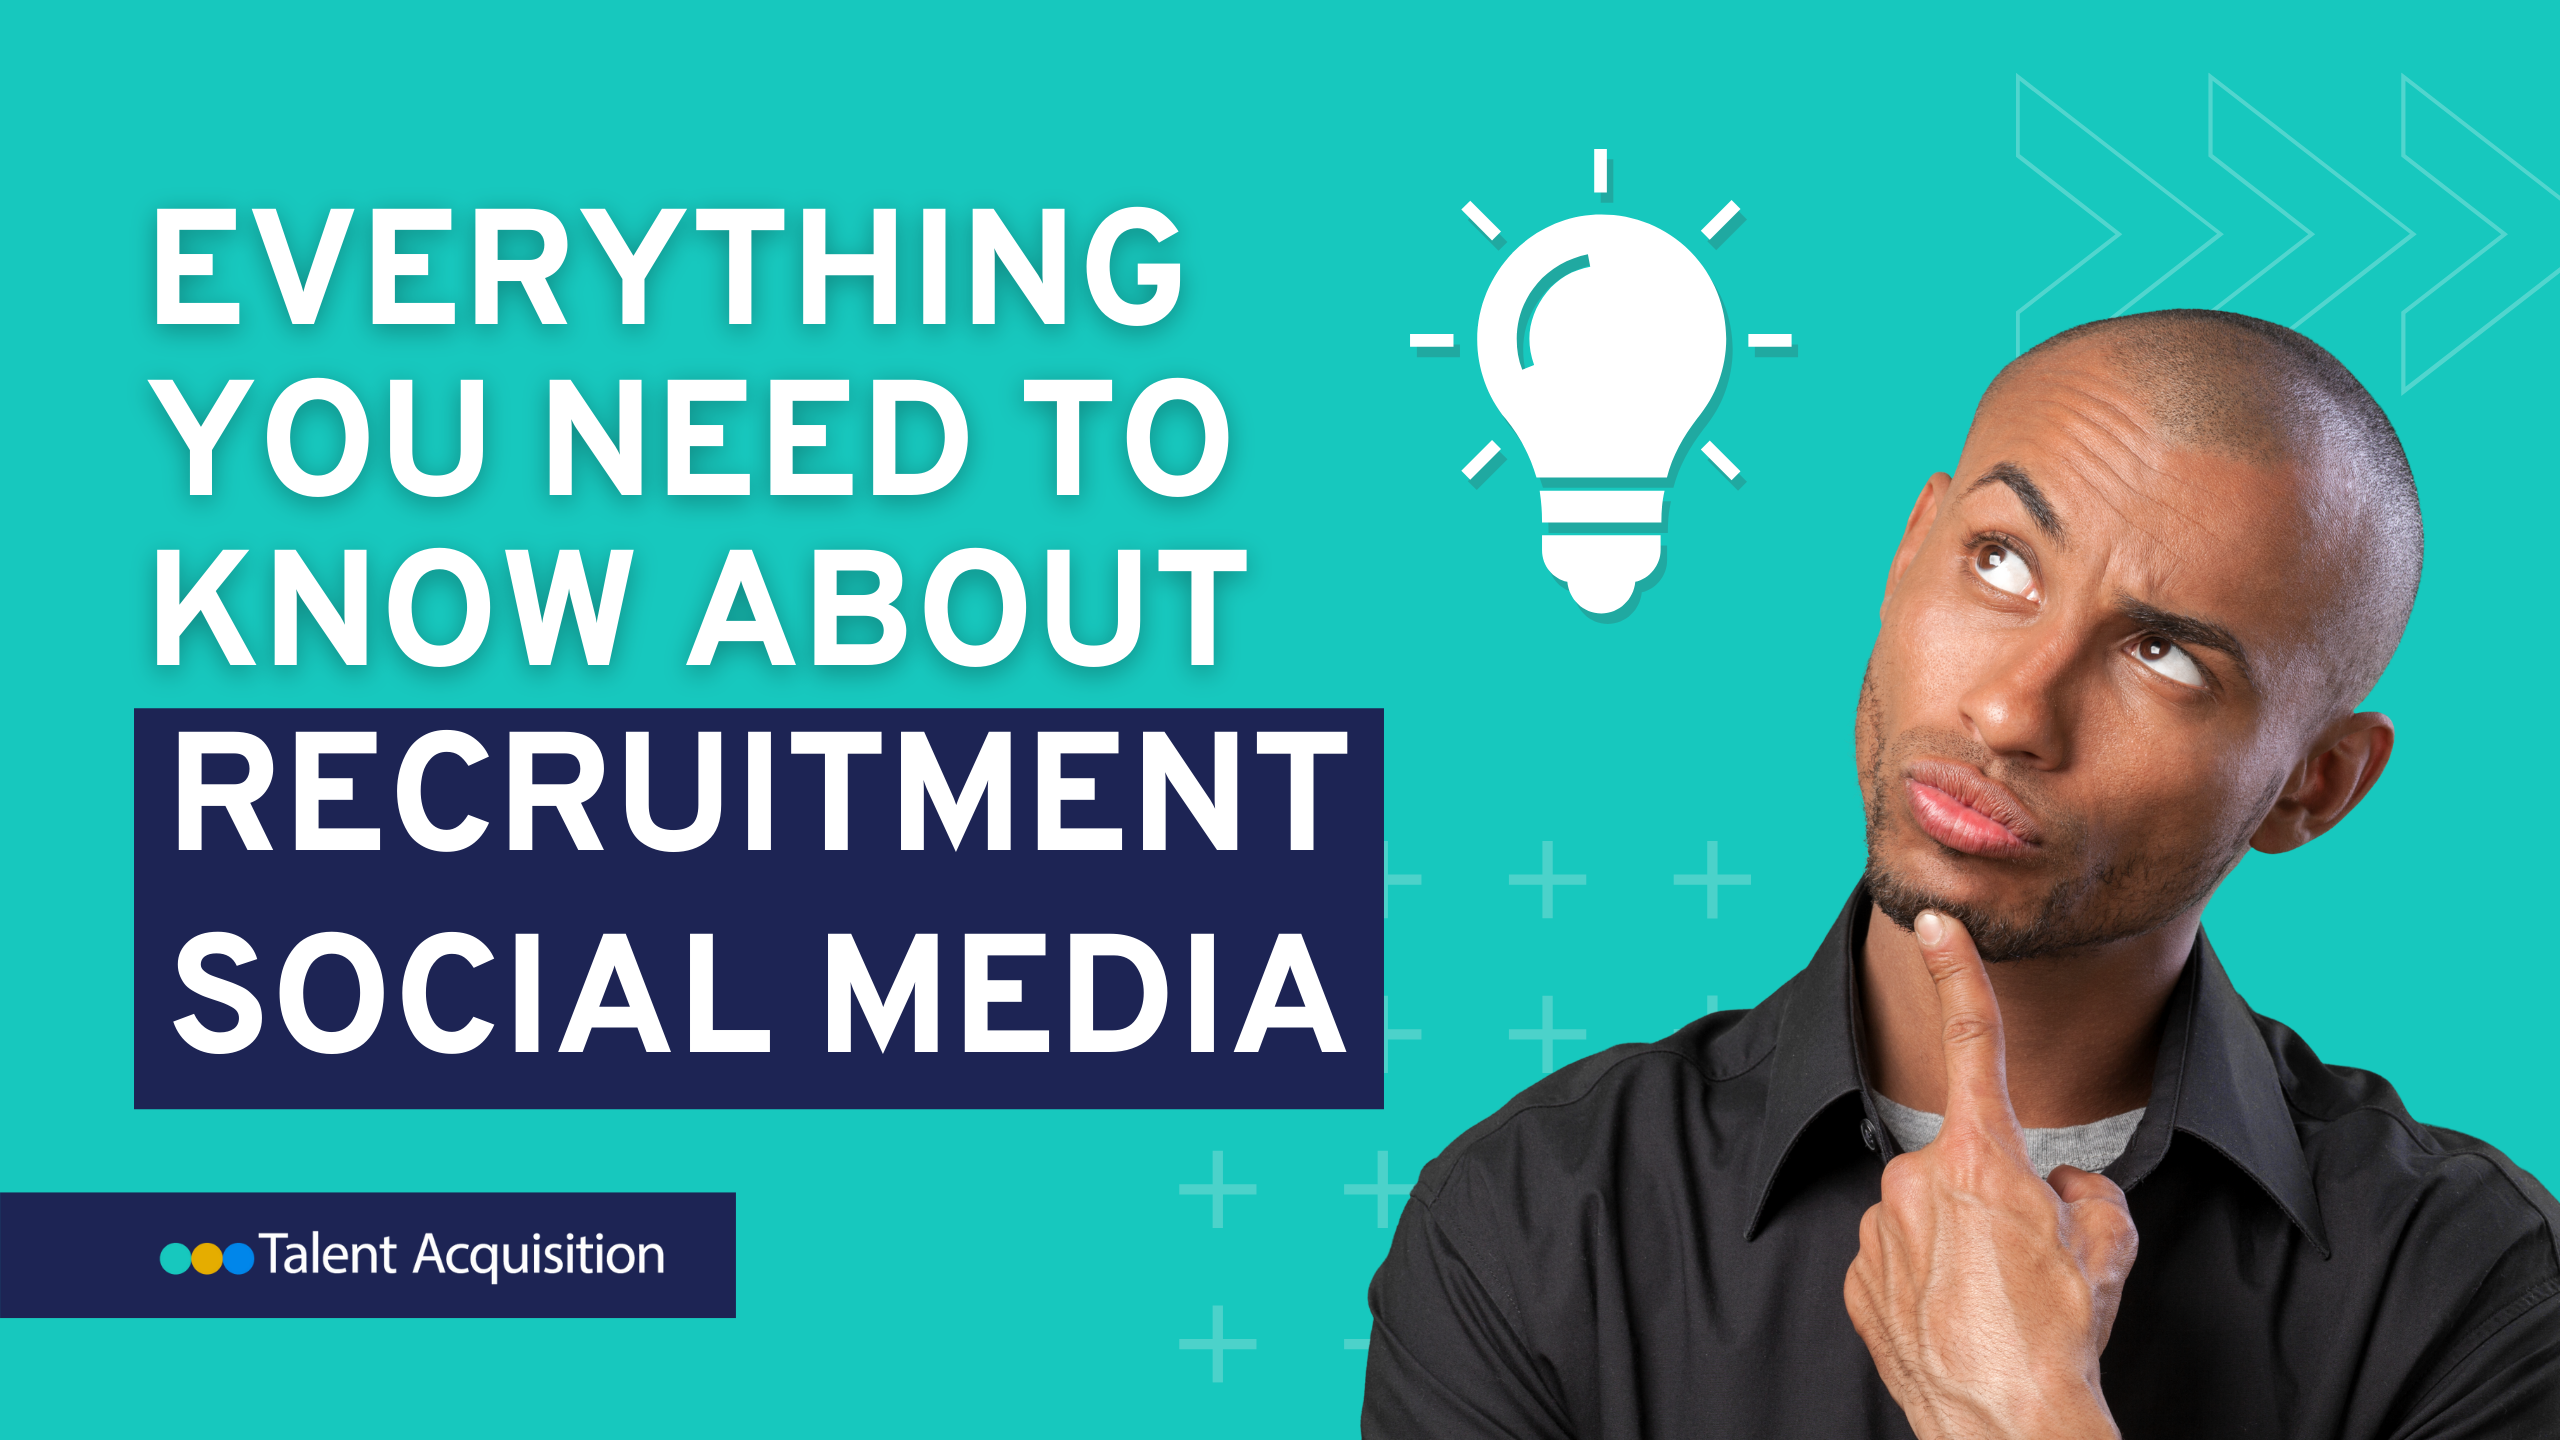 Everything You Need to Know About Recruitment Social Media